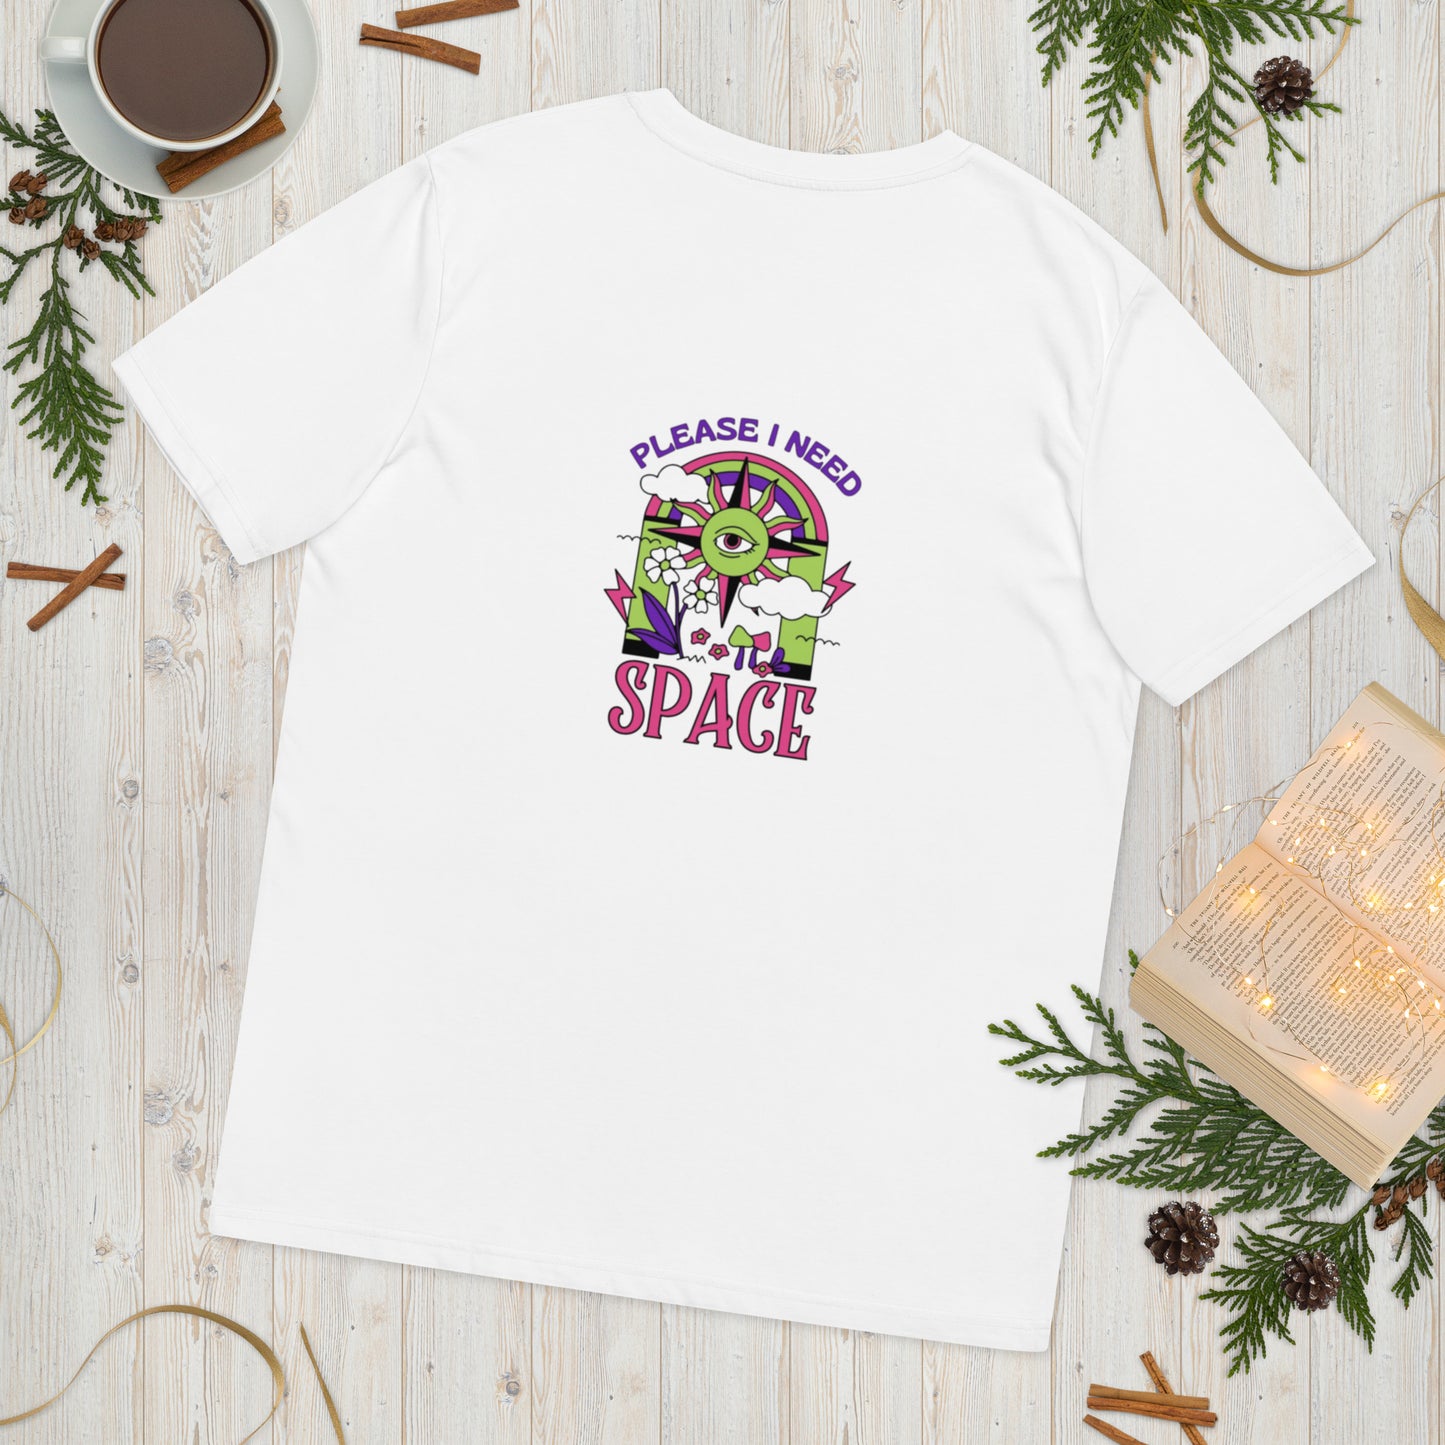 I need space T-shirt